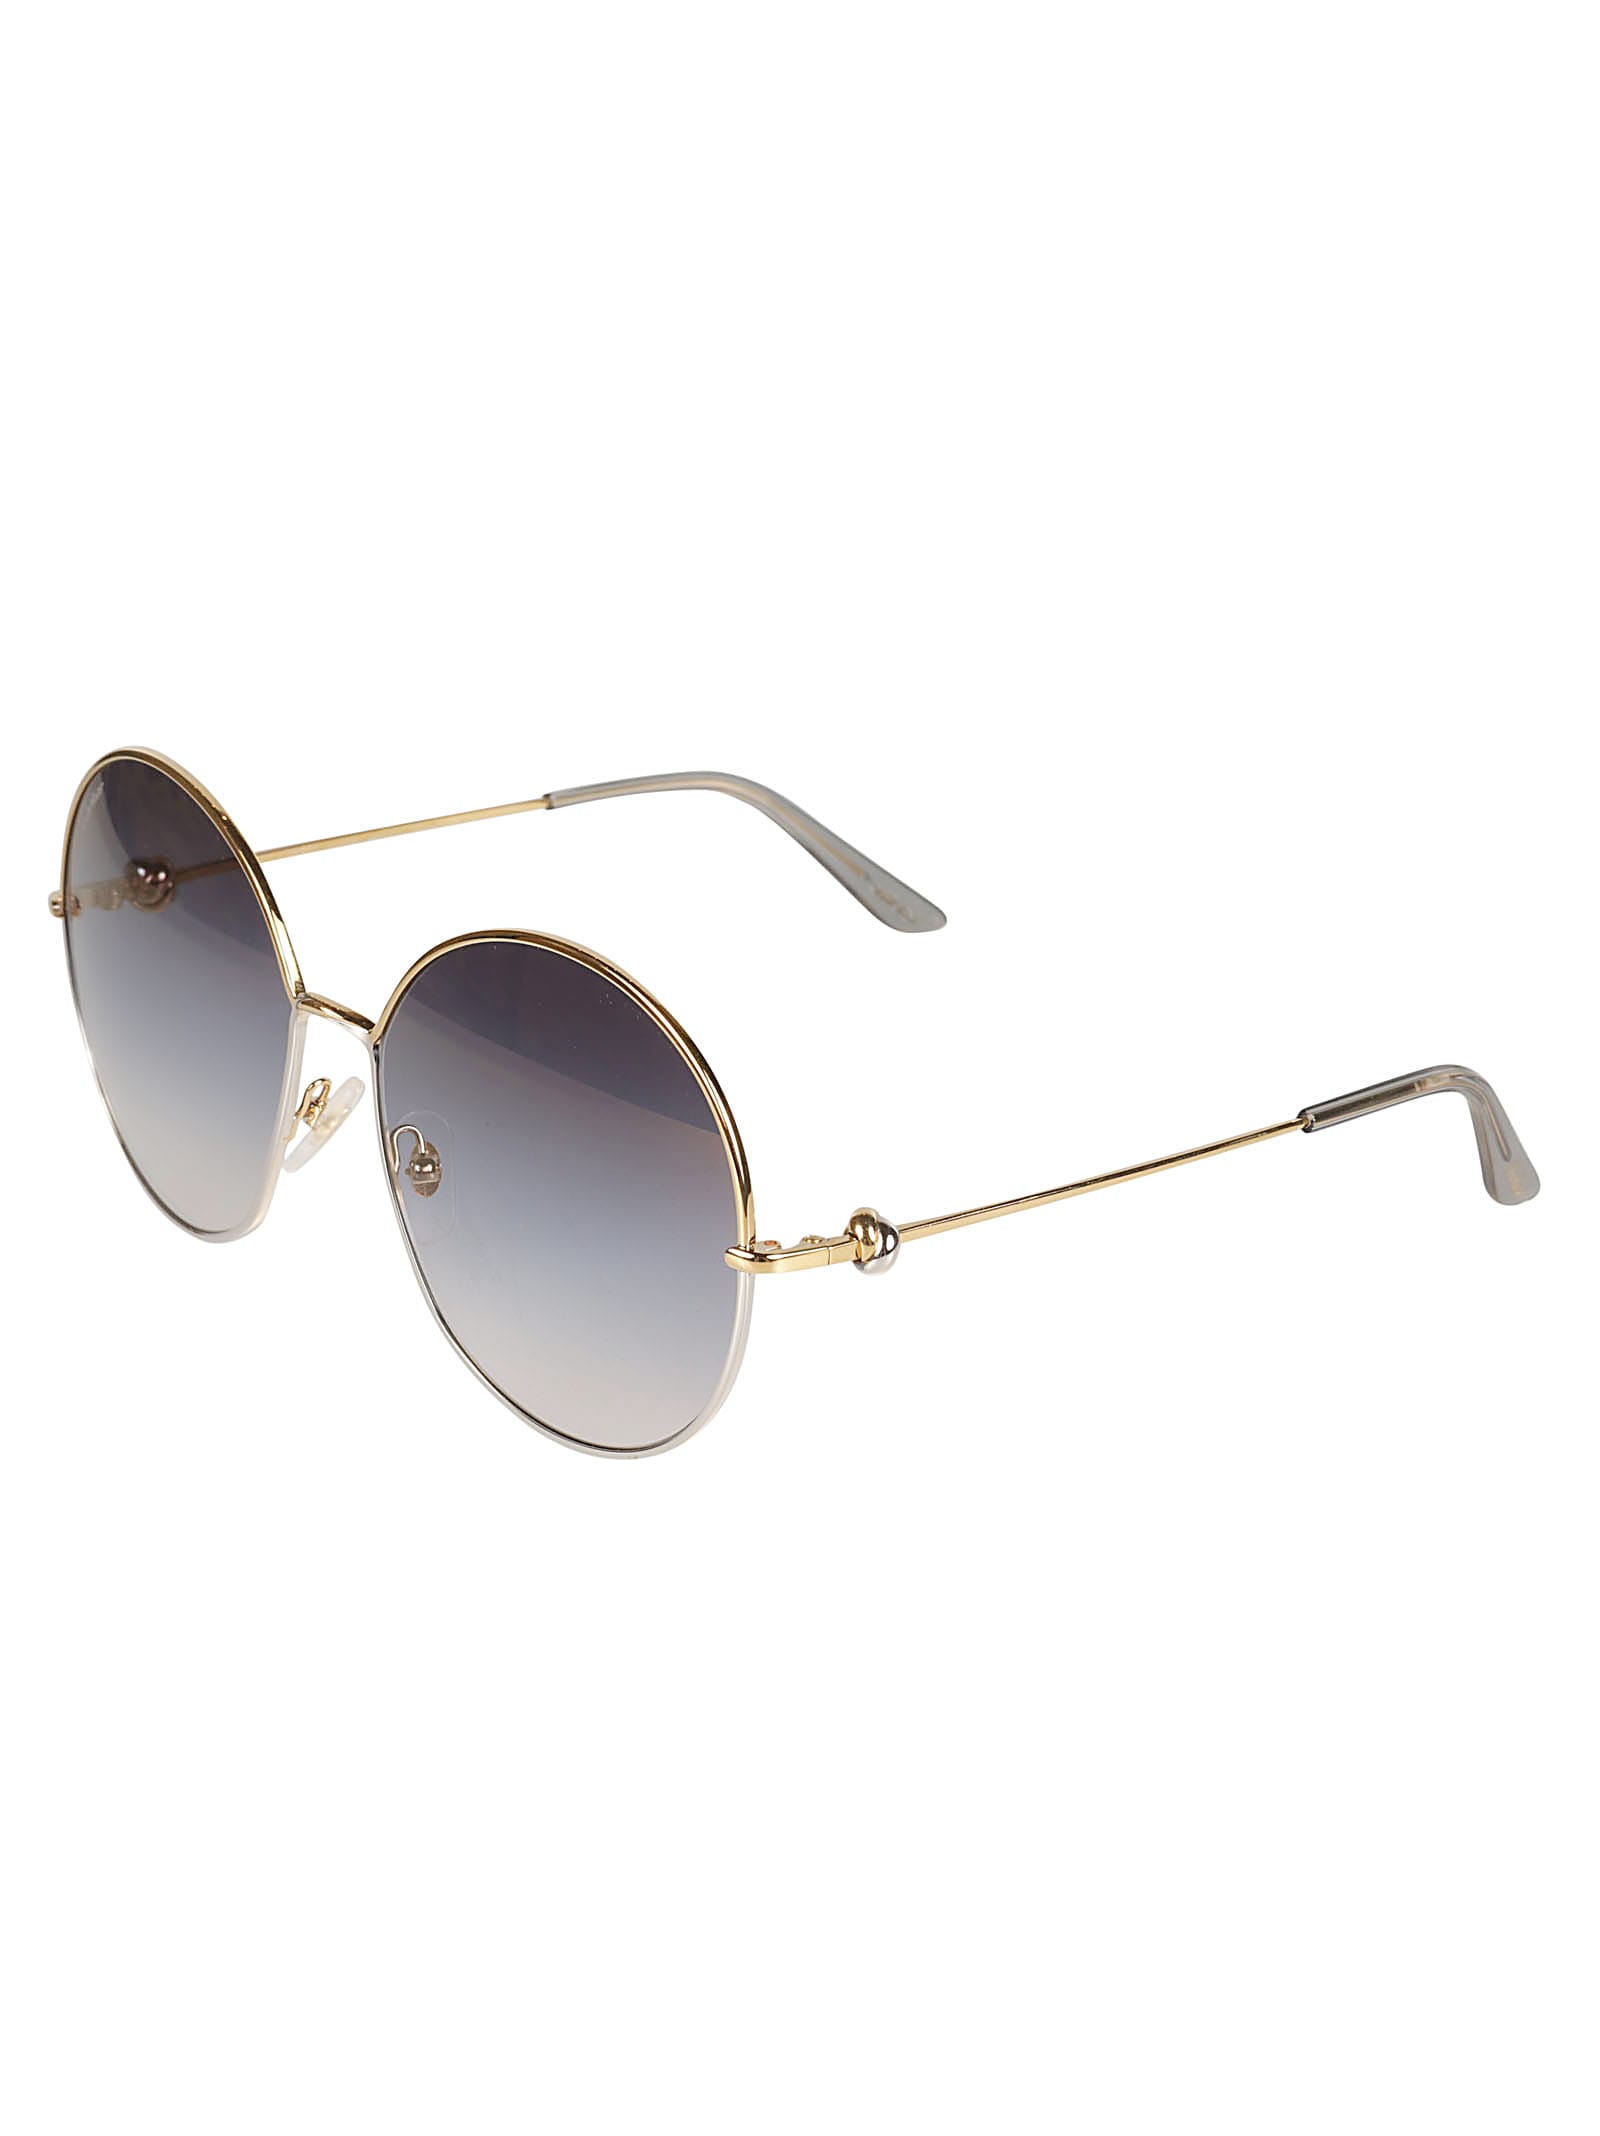 Shop Cartier Round Classic Sunglasses In Gold/grey